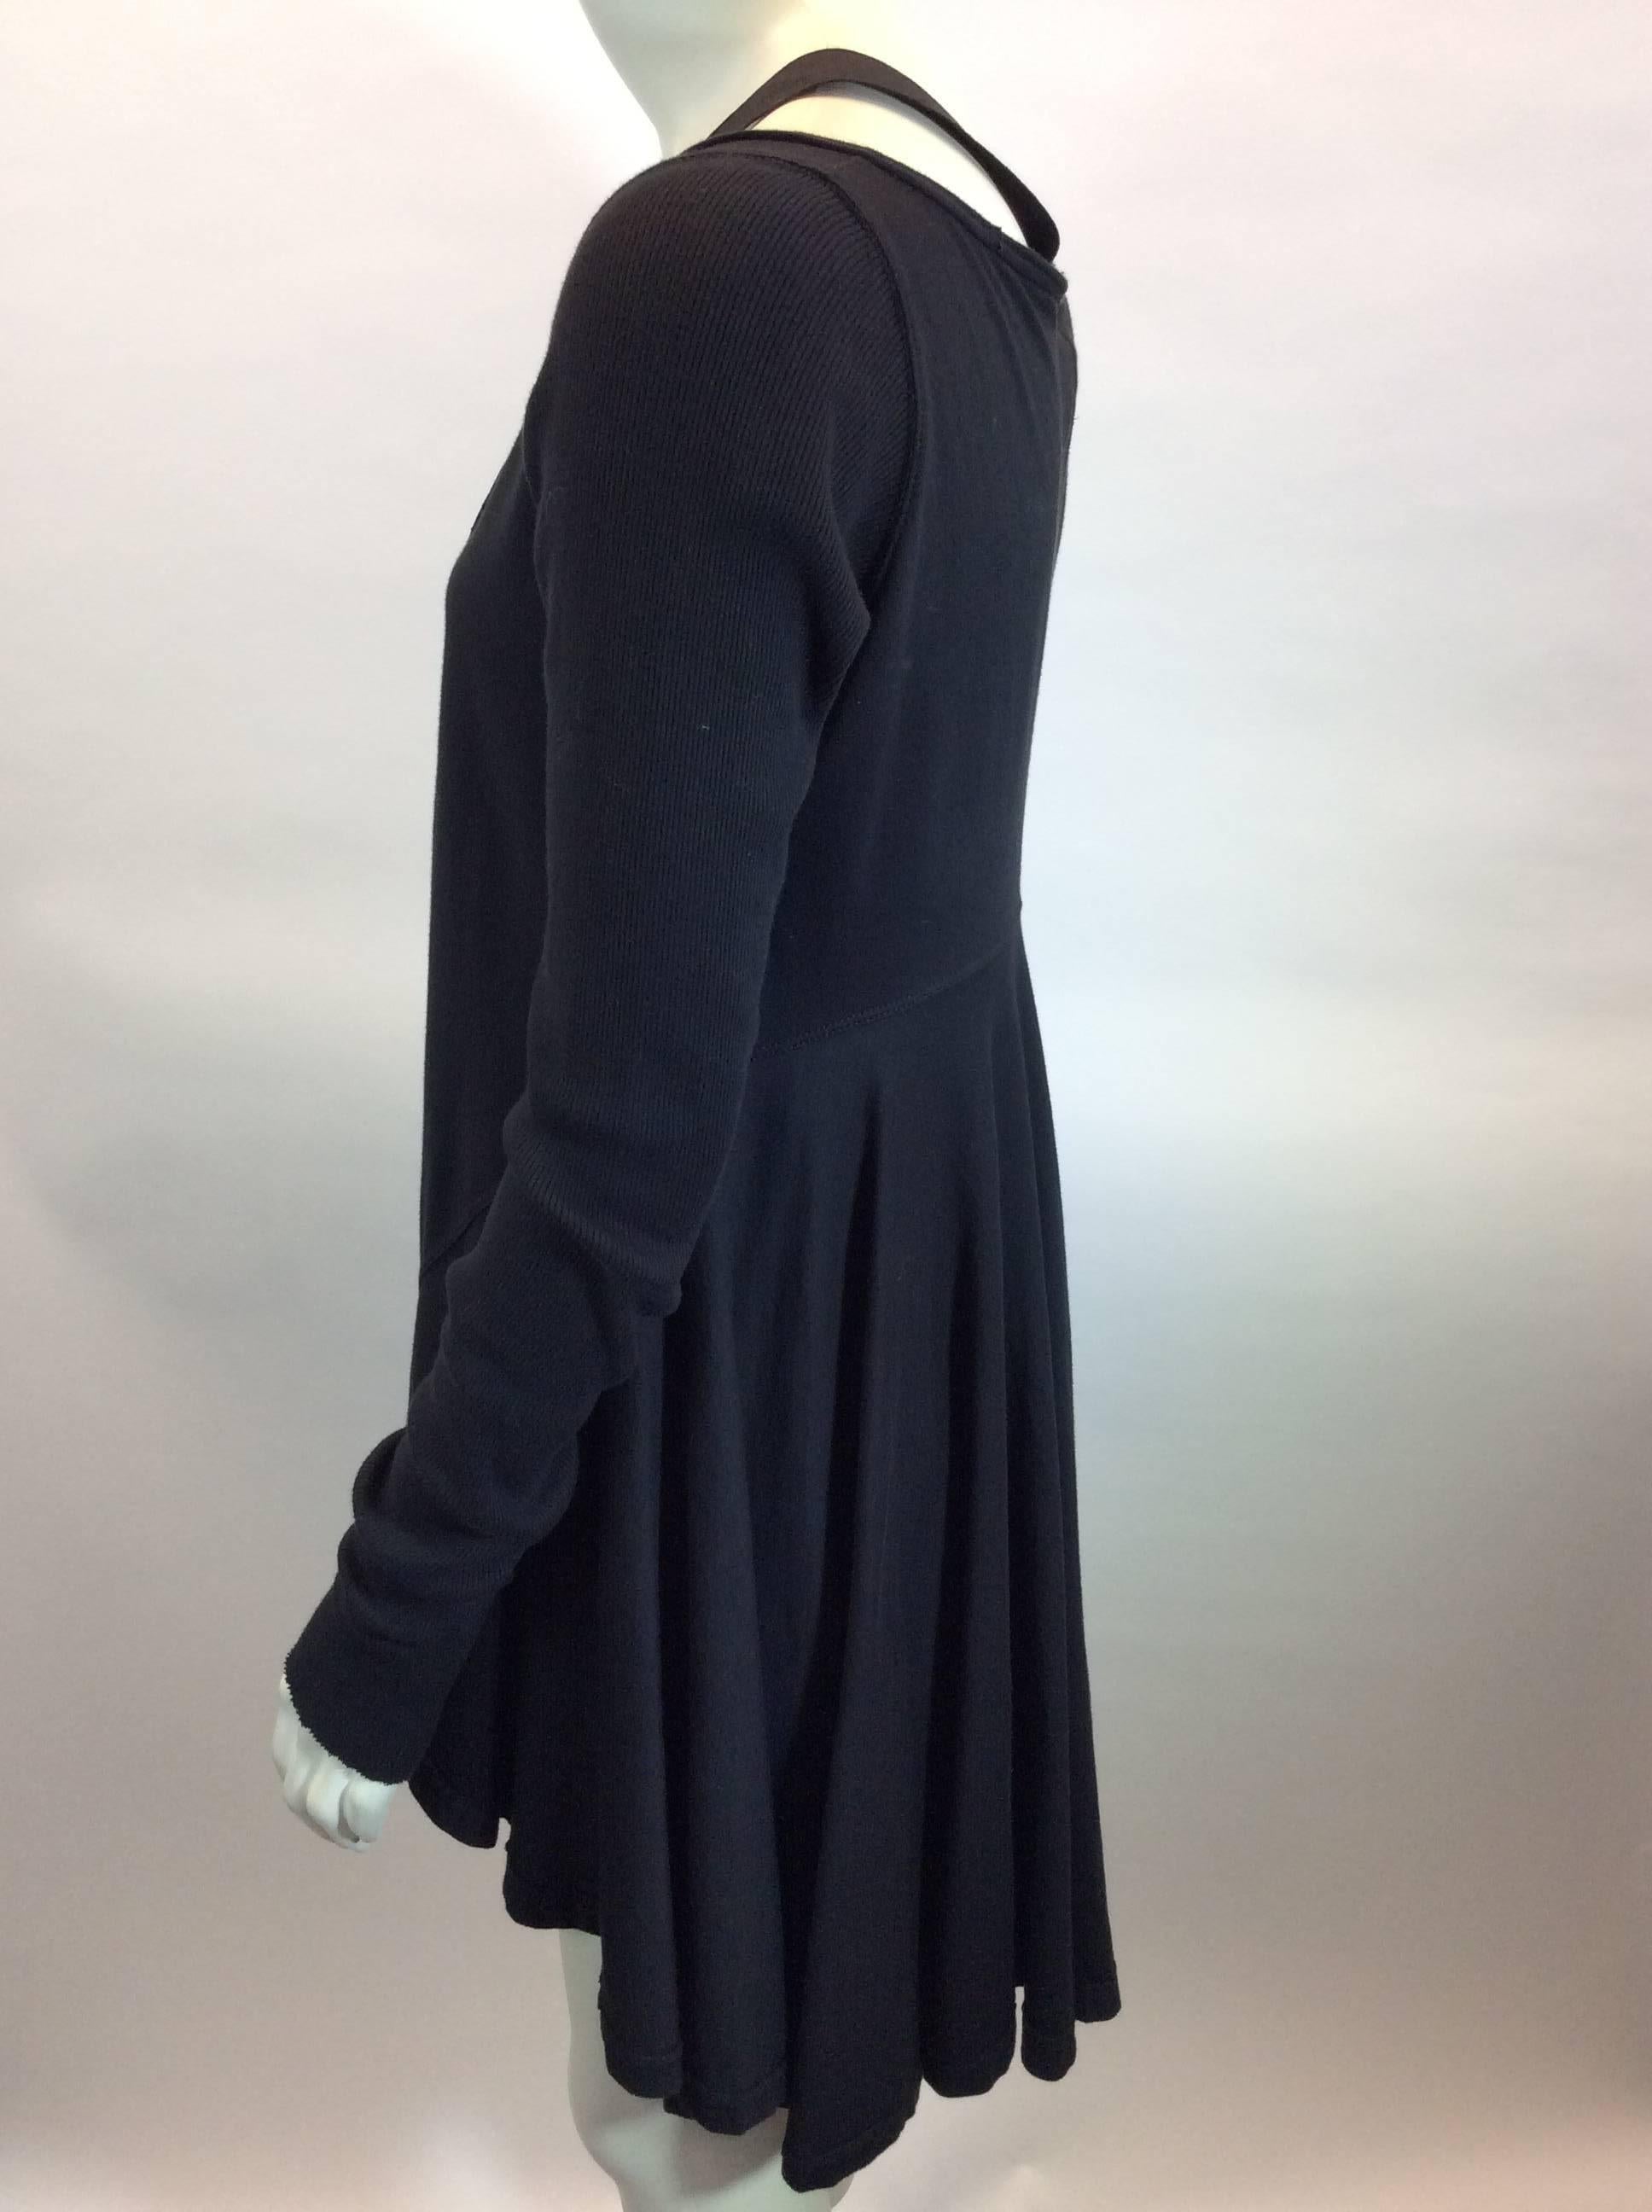 Women's Rick Owens Black Knit Dress with Strap Detail For Sale